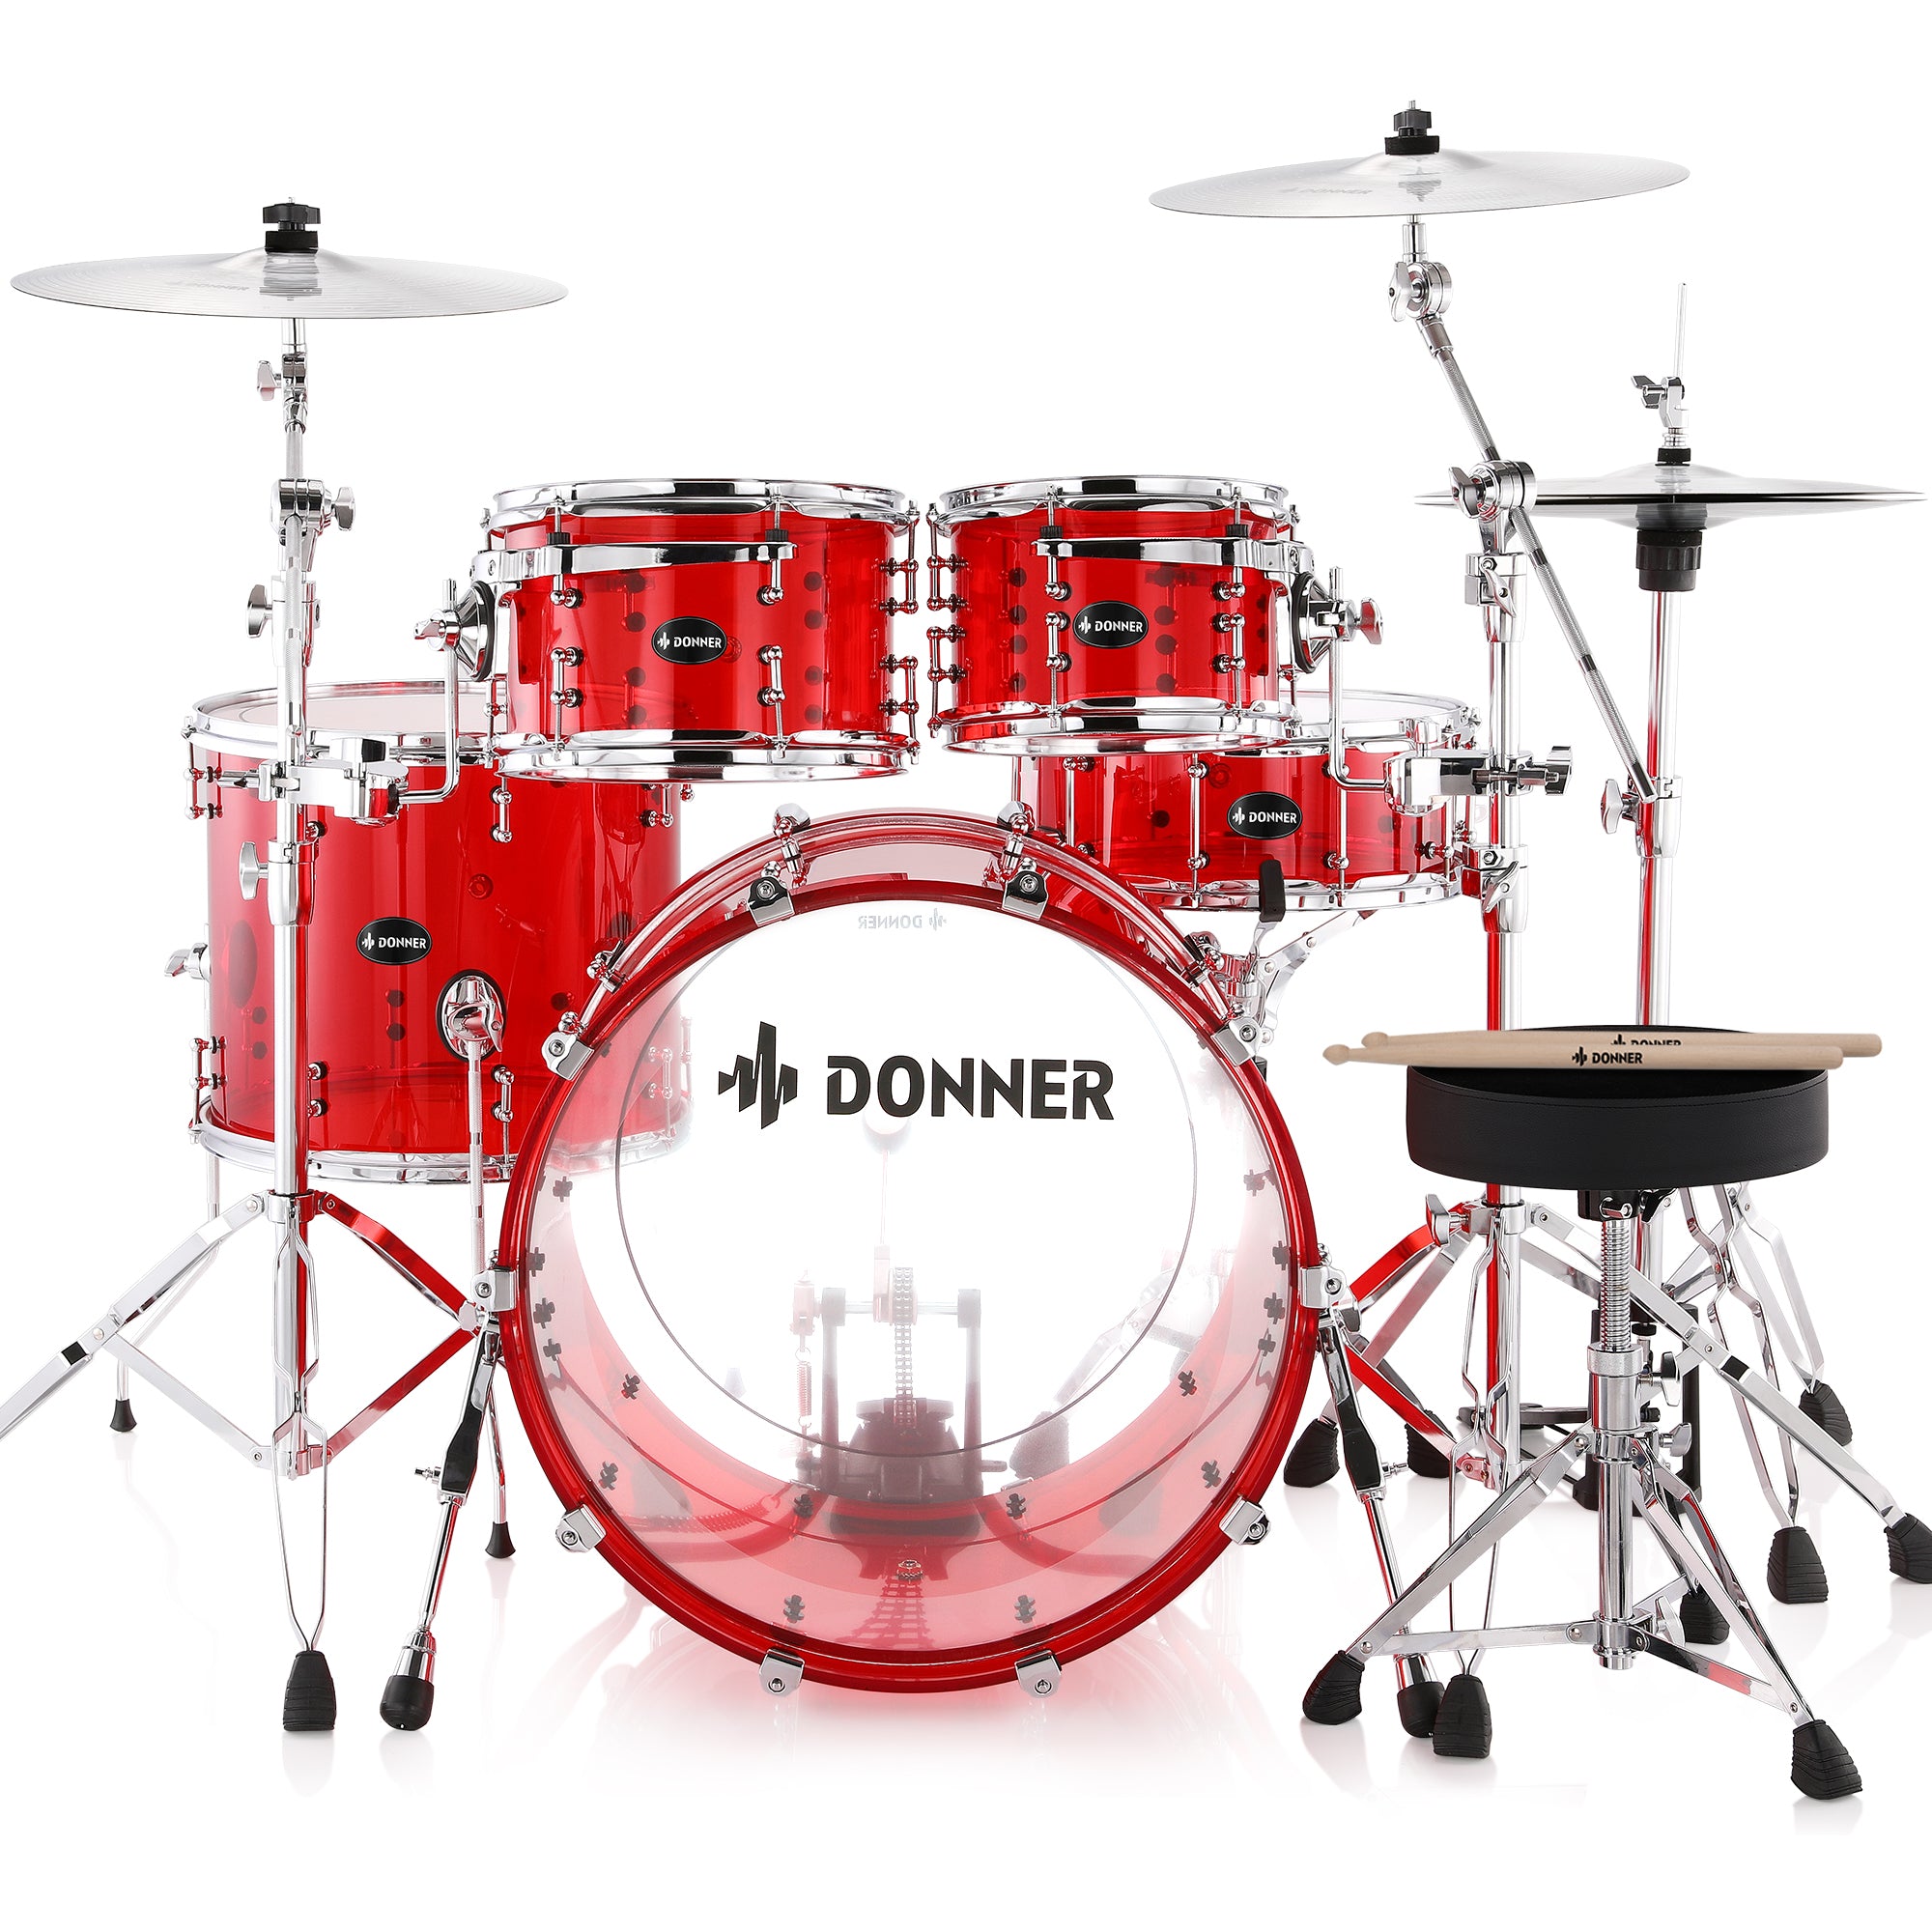 

Donner DDS-1000 22-inch Crystal 5-Piece Drum Set Acrylic Shell Pack